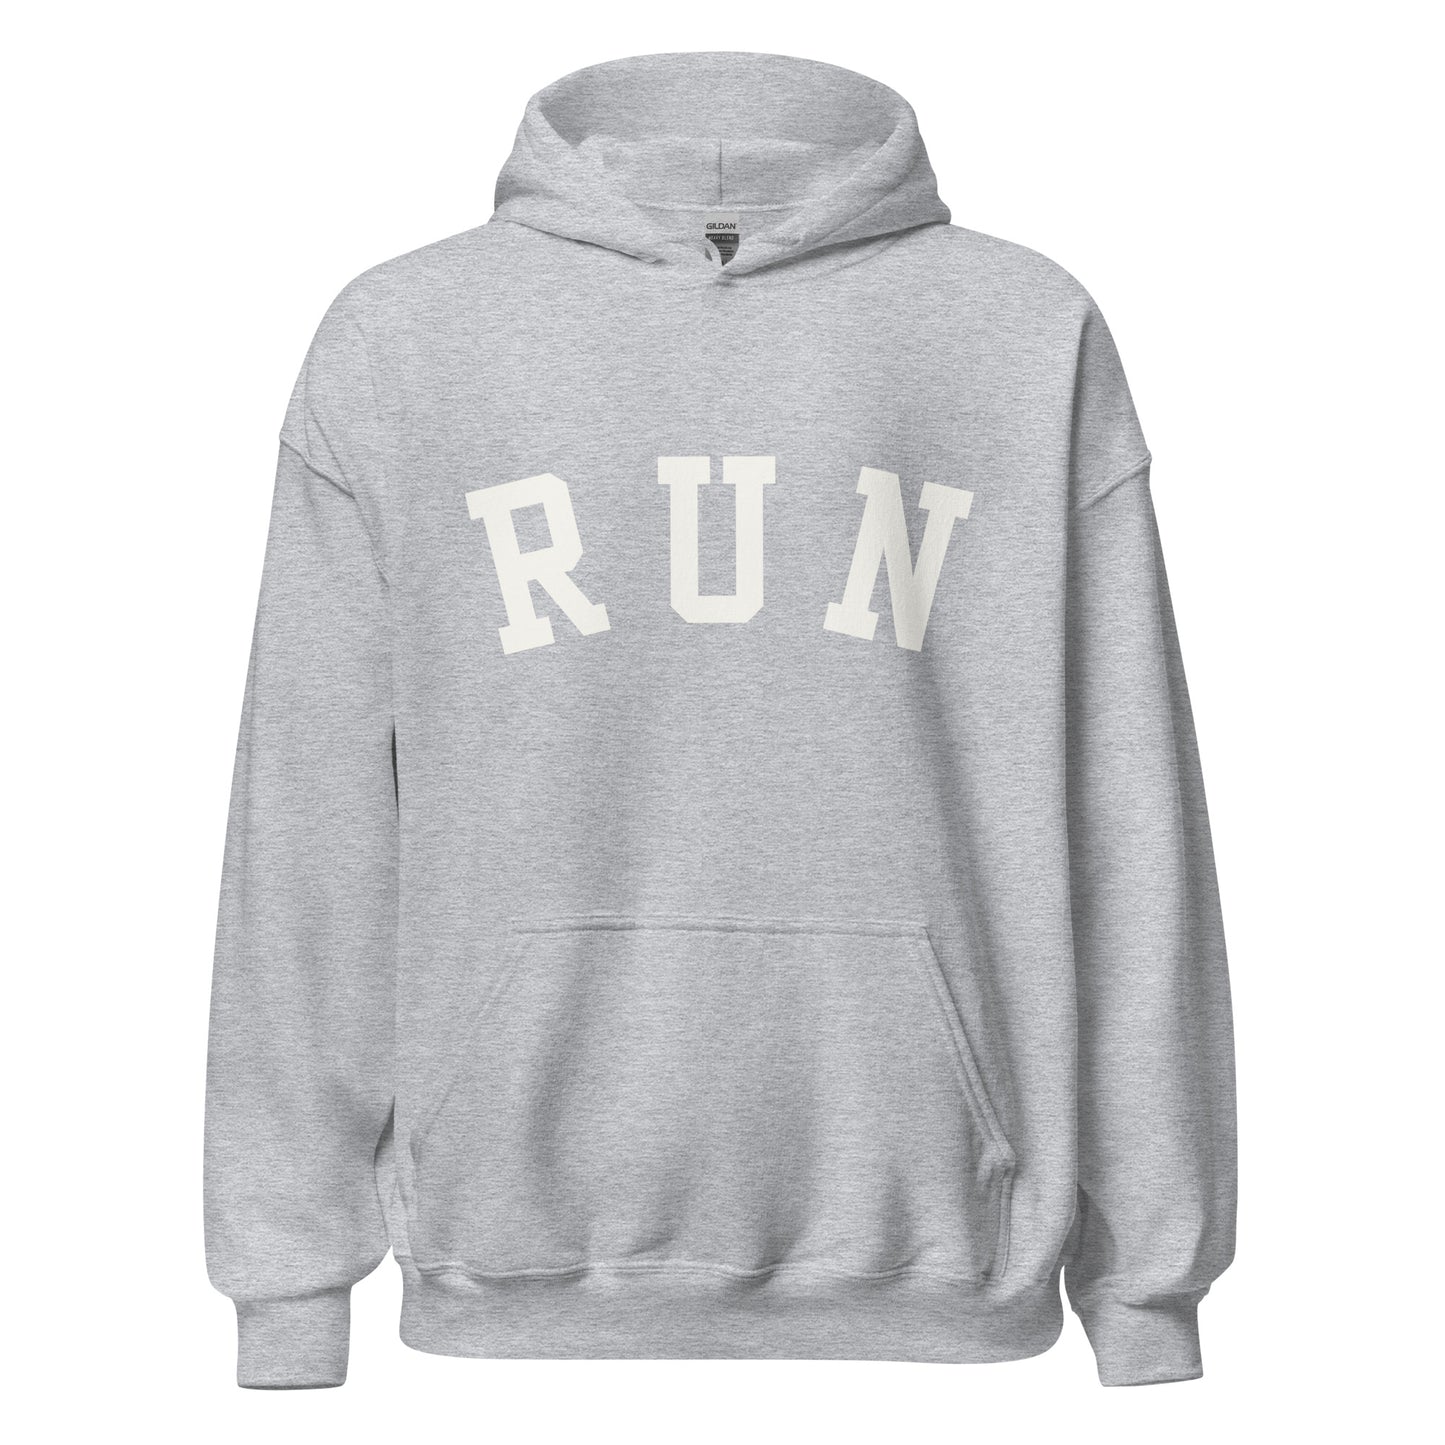 light grey unisex hoodie with the word run across the chest in a white bold varsity style font